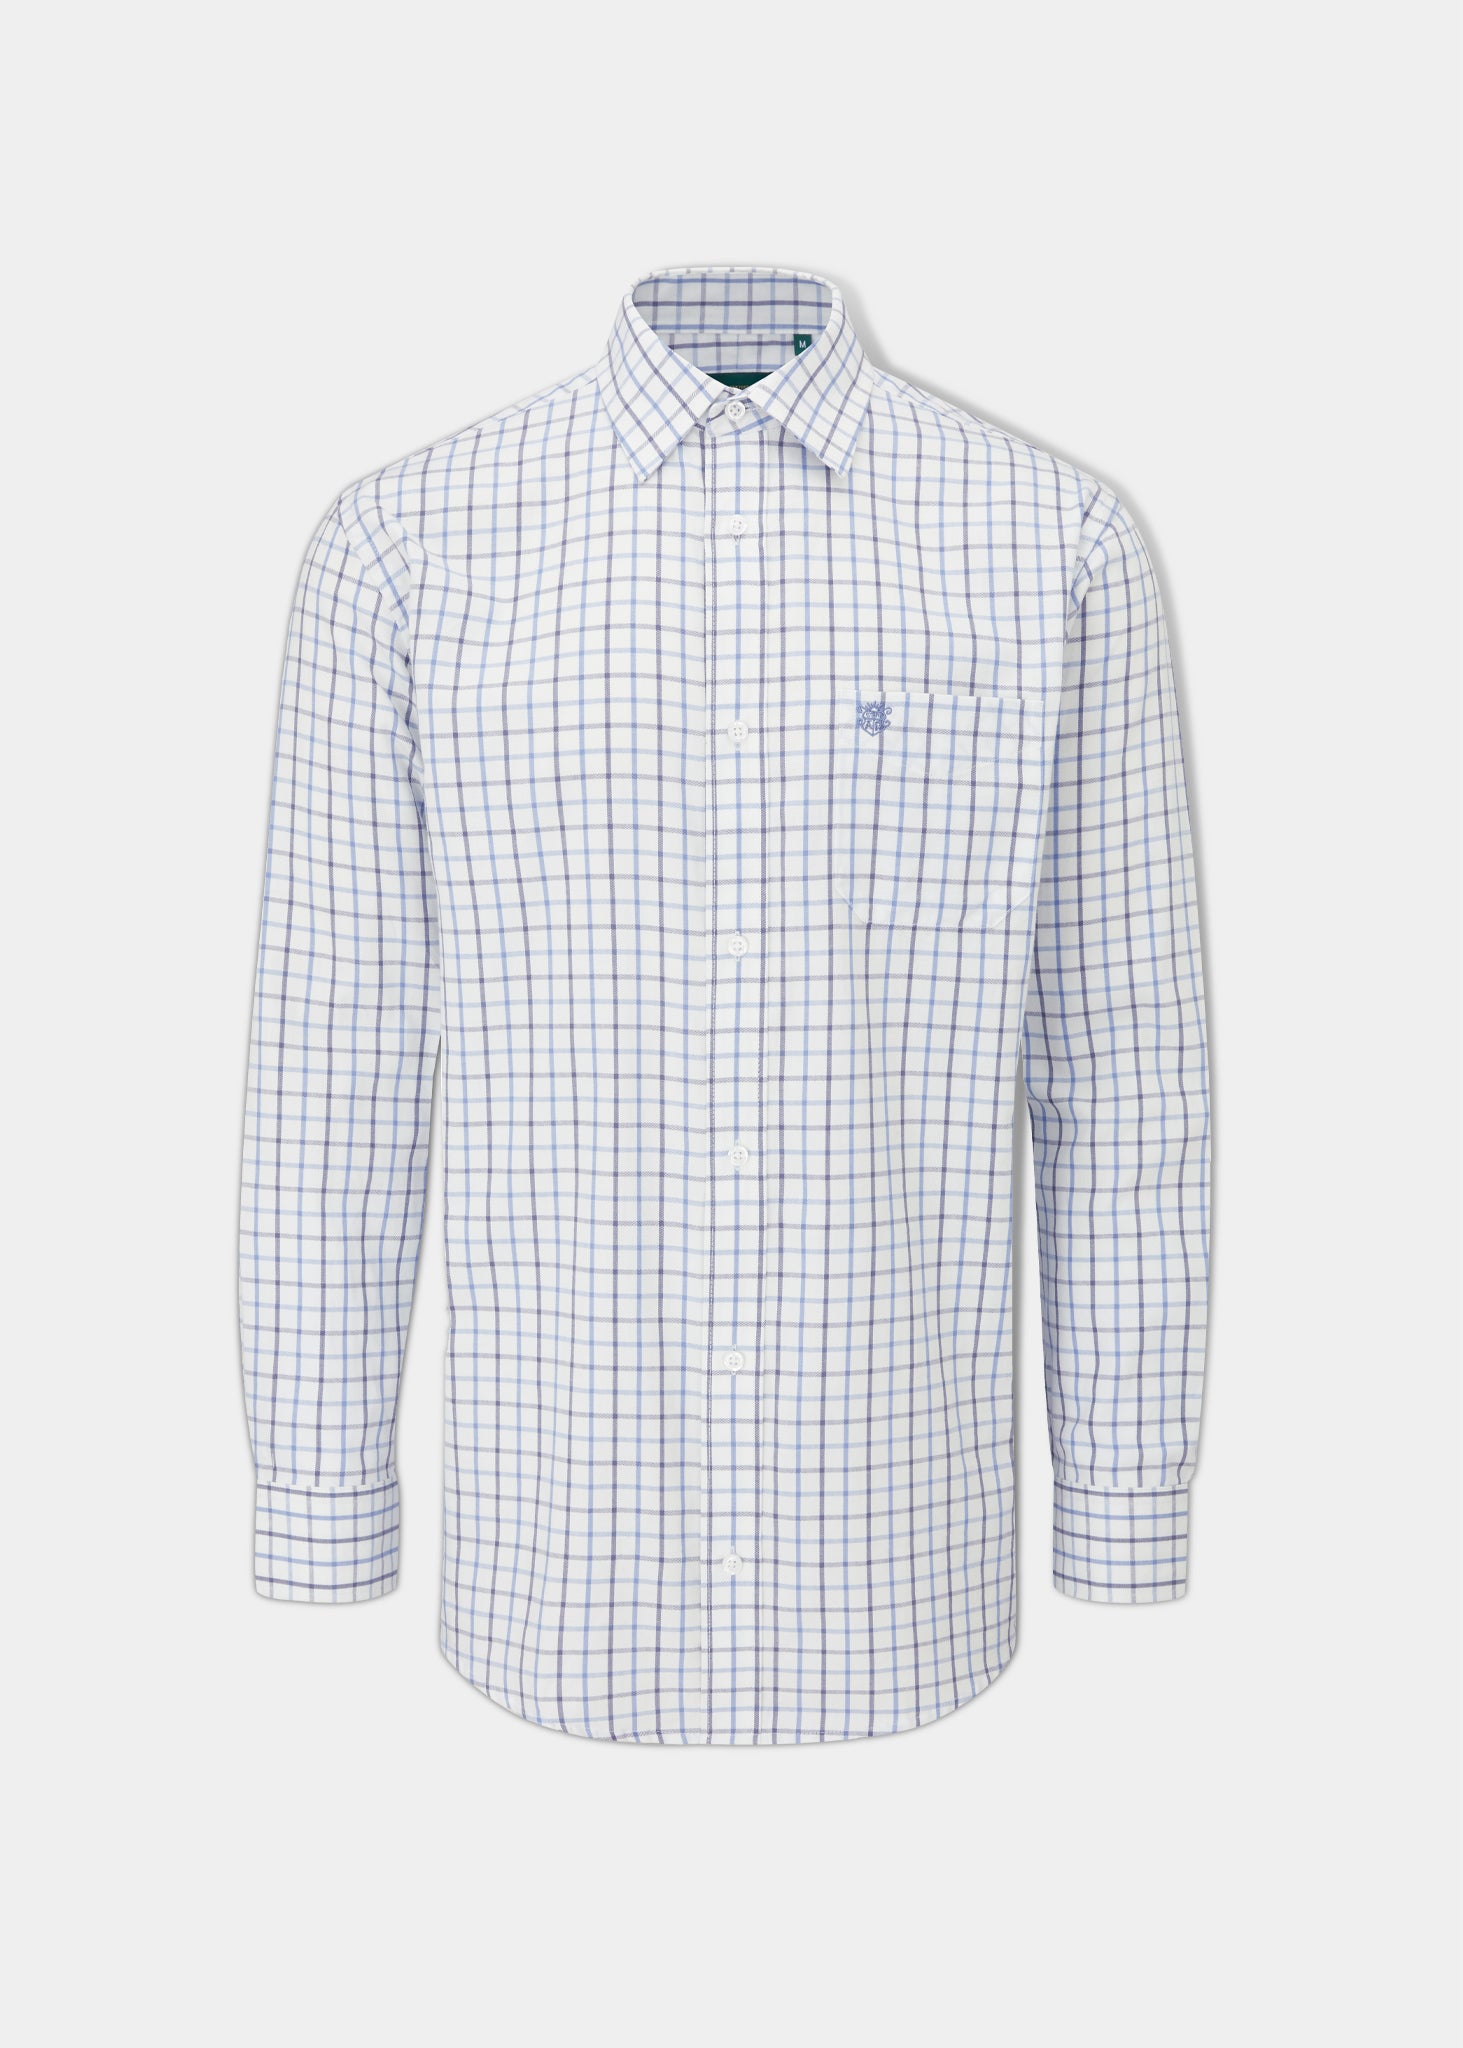 Ilkley Children's Check Country Shirt In Blue